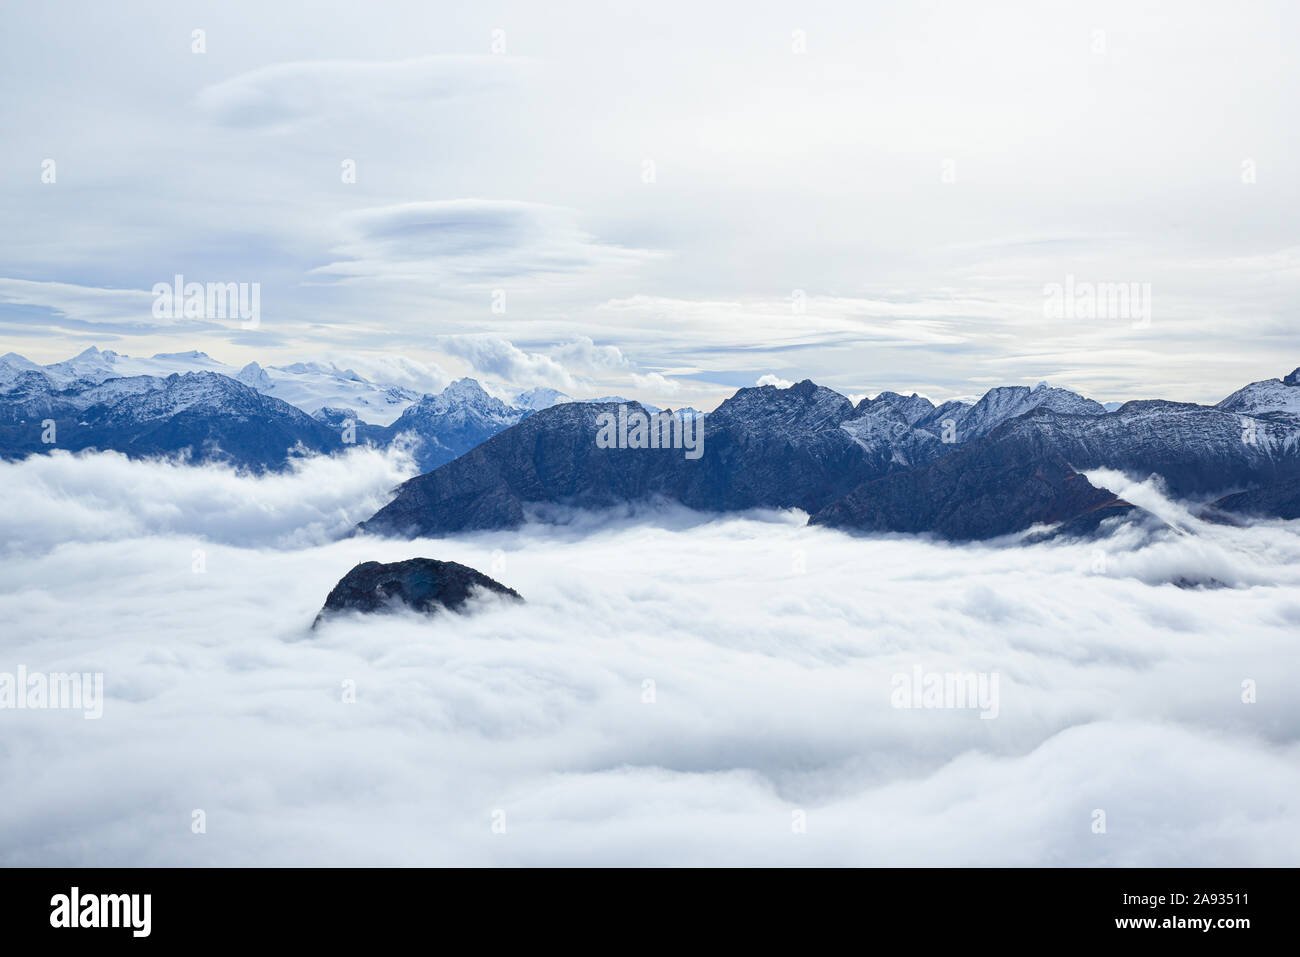 Monte Bianco, Italy. Aerial view of the Alps surrounded by clouds. Stock Photo